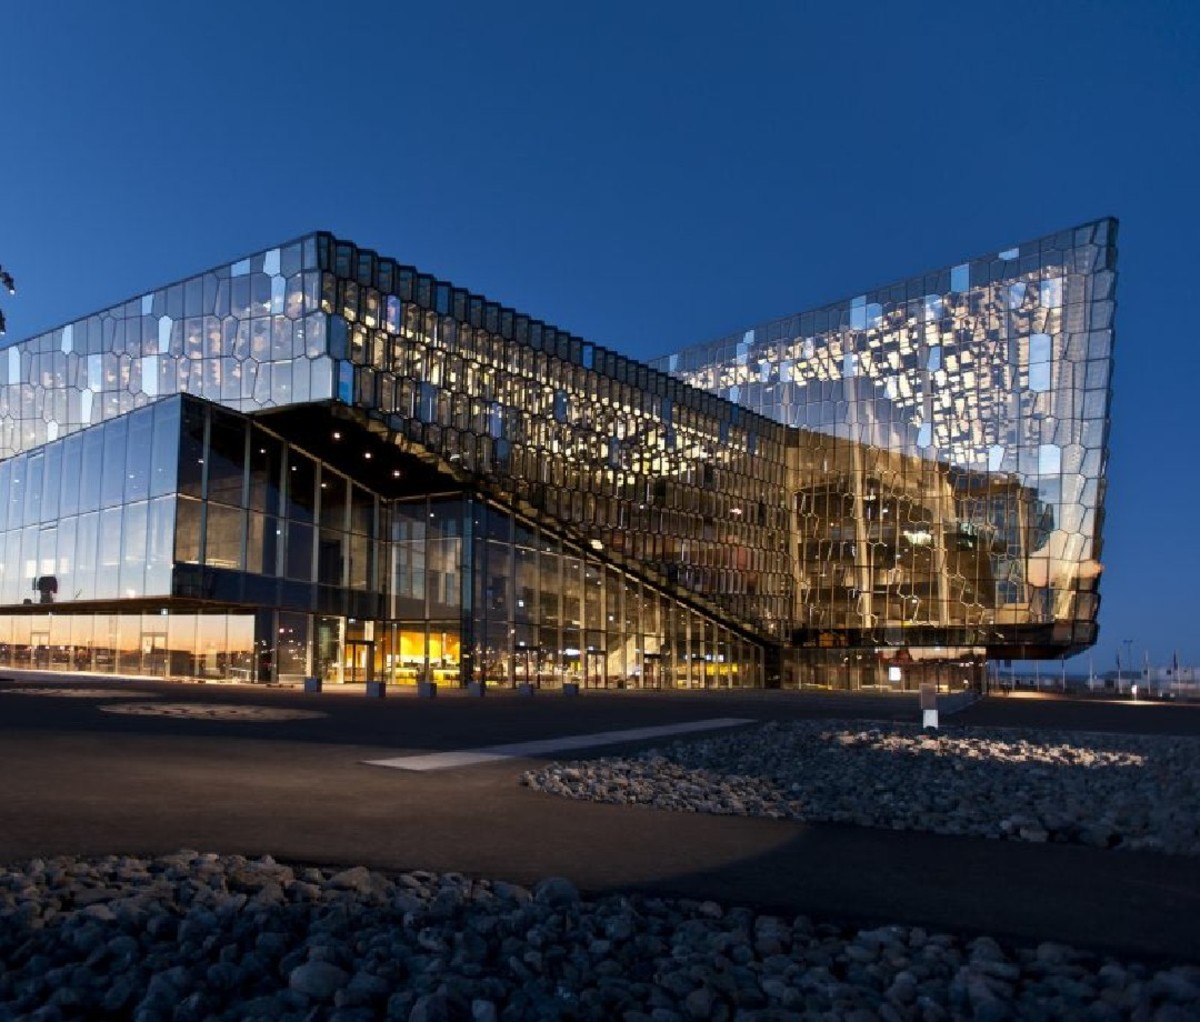 The Harpa Concert Hall, designed by Olafur Eliasson